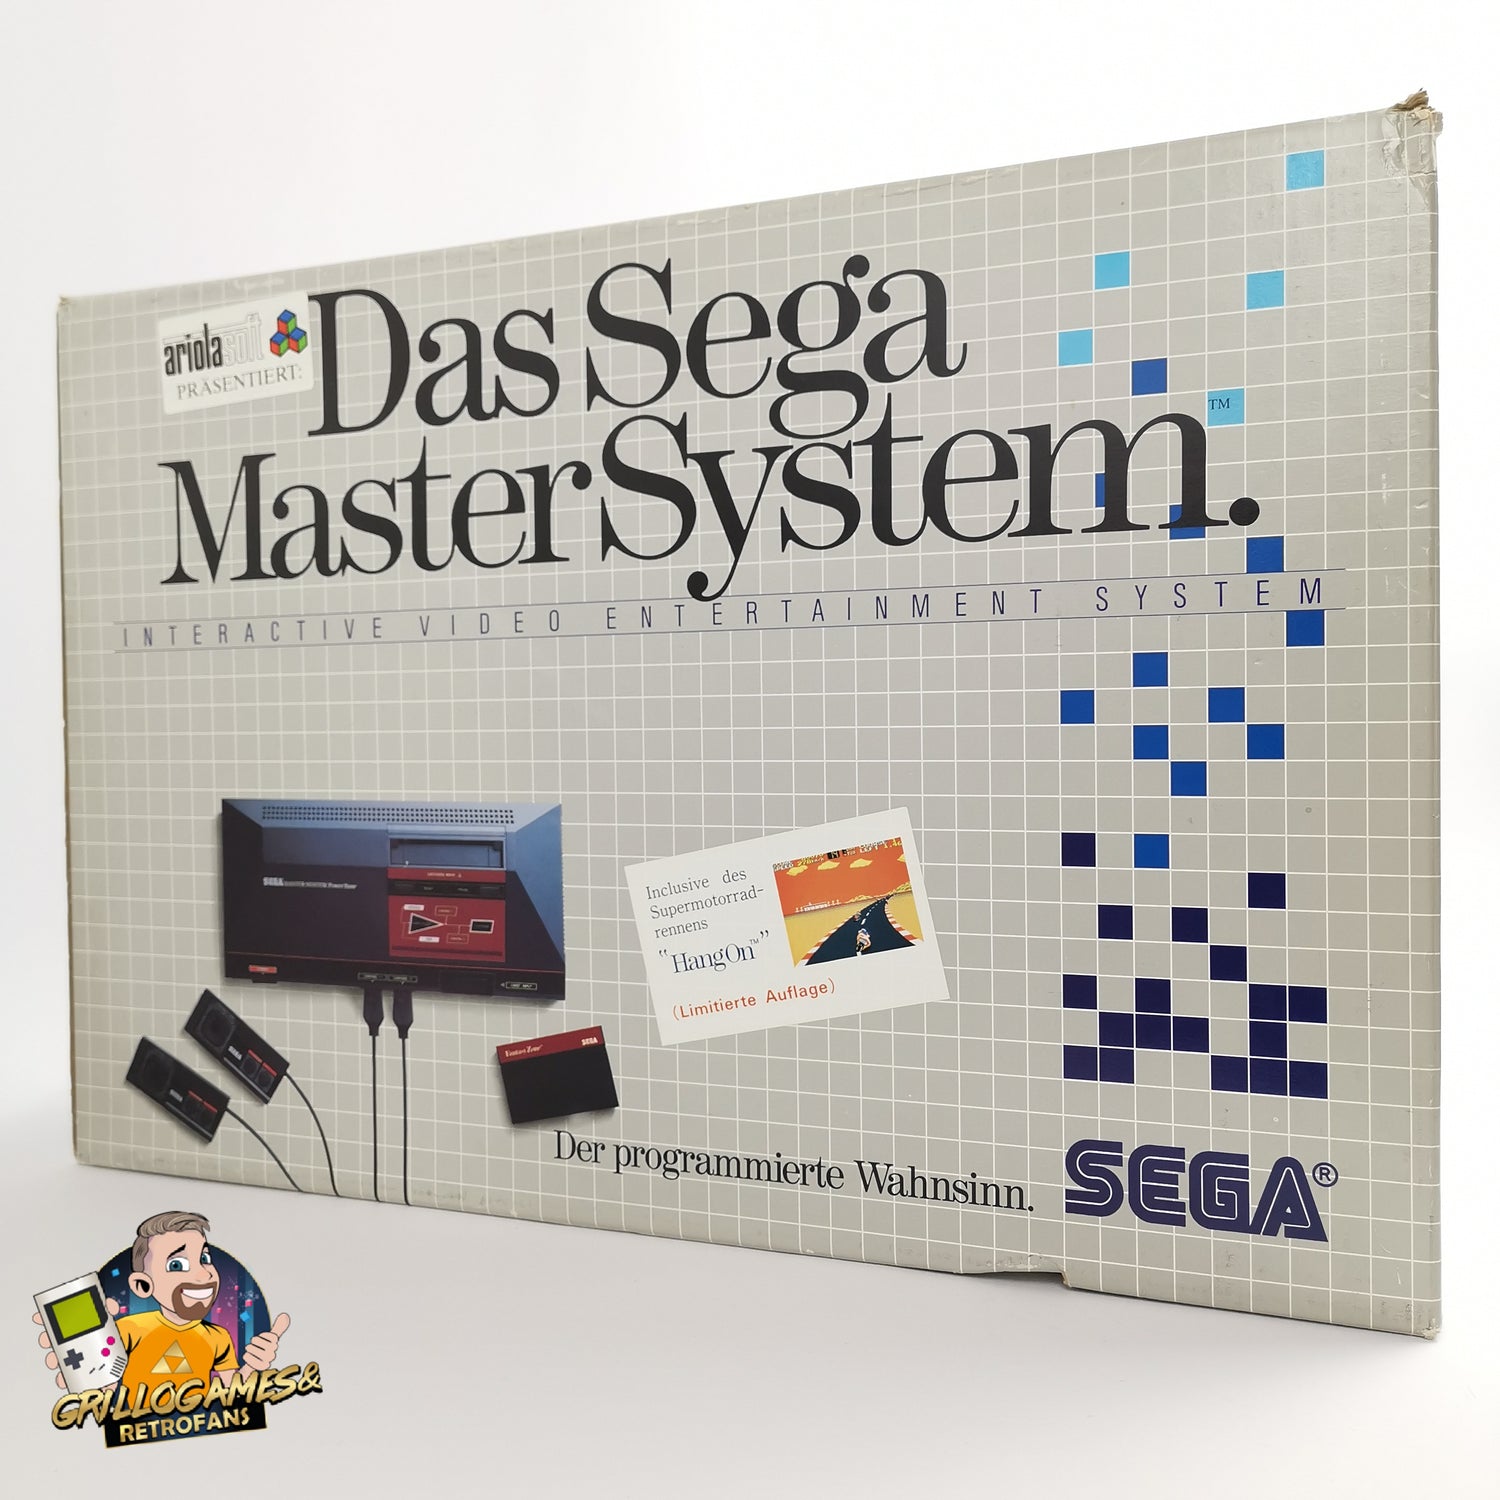 Sega Master System Console Power Base includes HangOn | PAL Console - original packaging